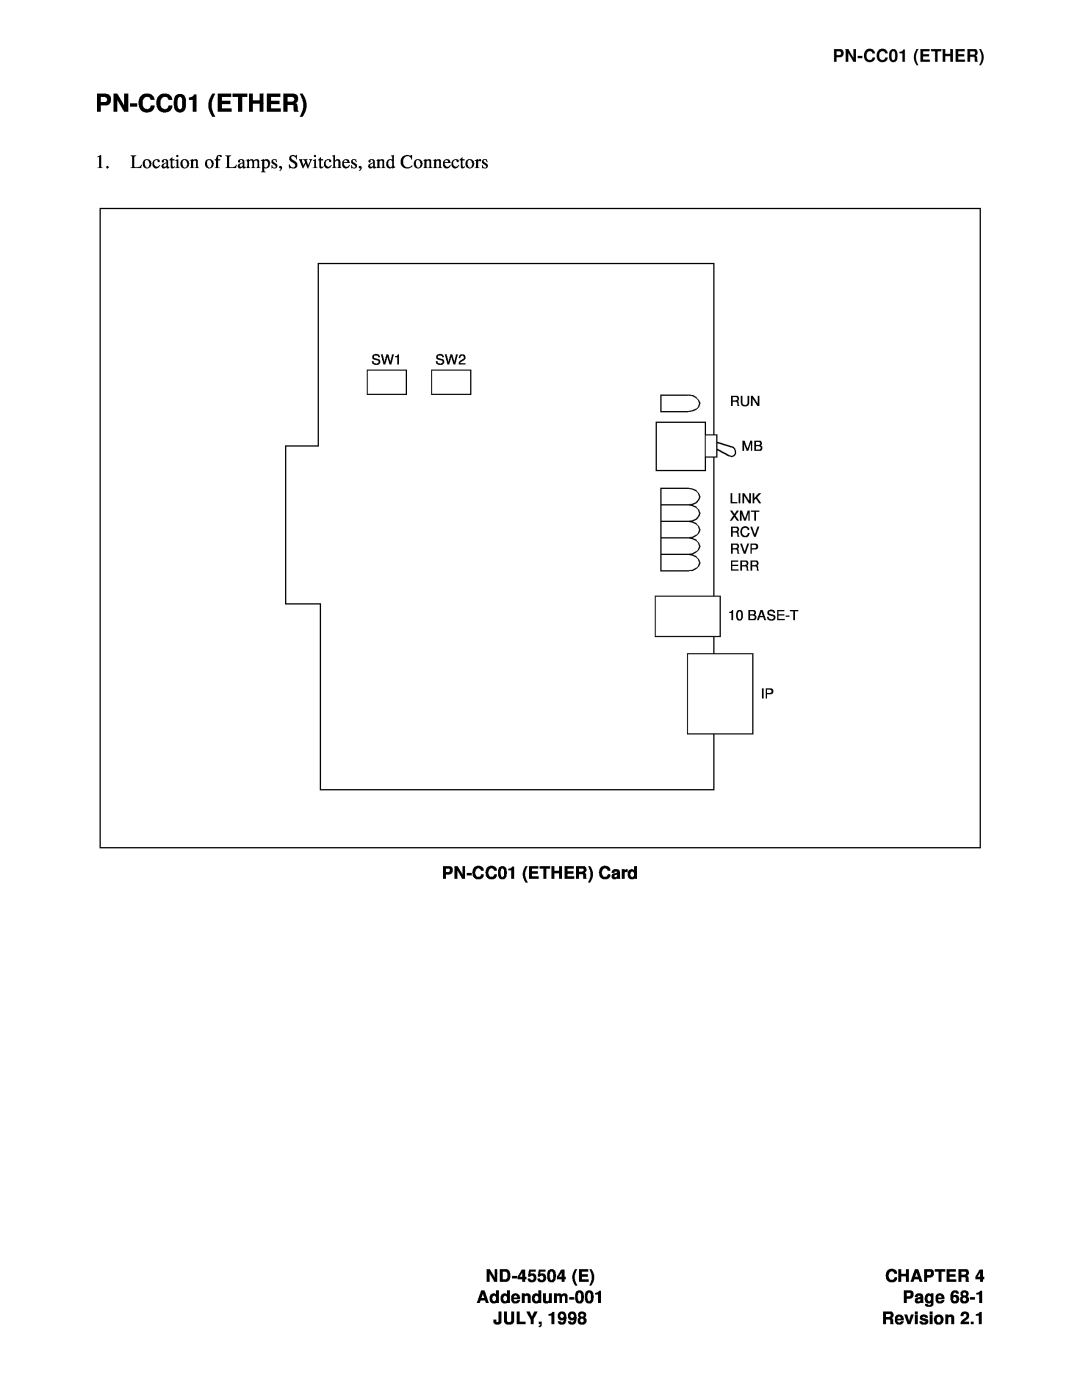 NEC 2000 IVS manual PN-CC01ETHER, Location of Lamps, Switches, and Connectors 